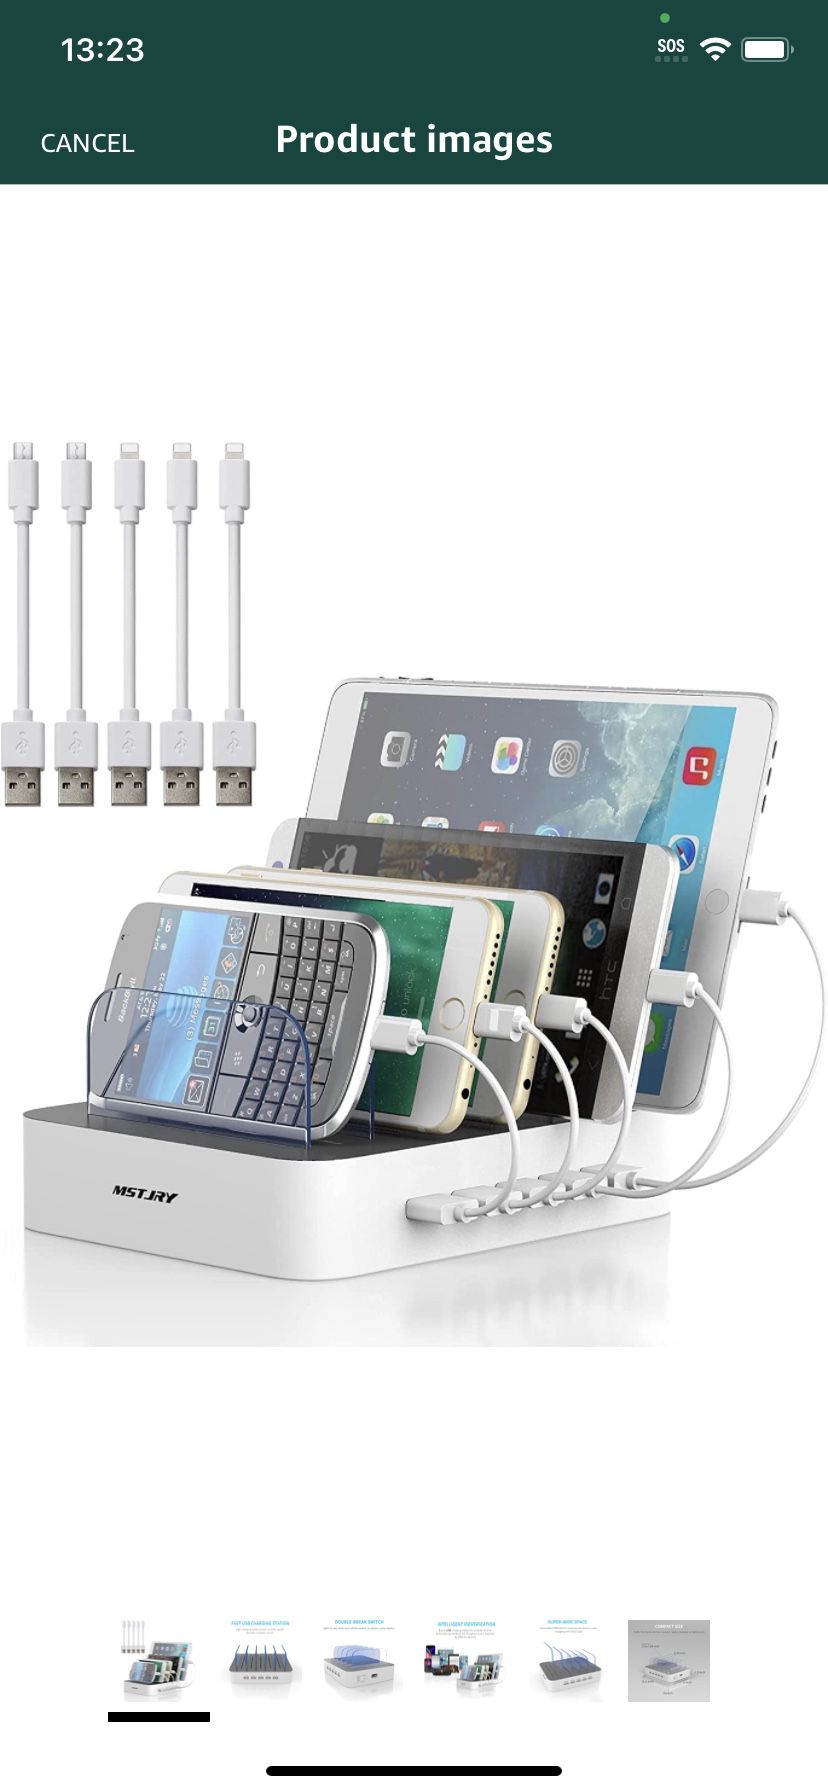 Charging Station for Multiple Devices, 5 Port Multi USB Charger Station with Power Switch Designed for iPhone iPad Cell Phone Tablets (White, 6 Mixed 